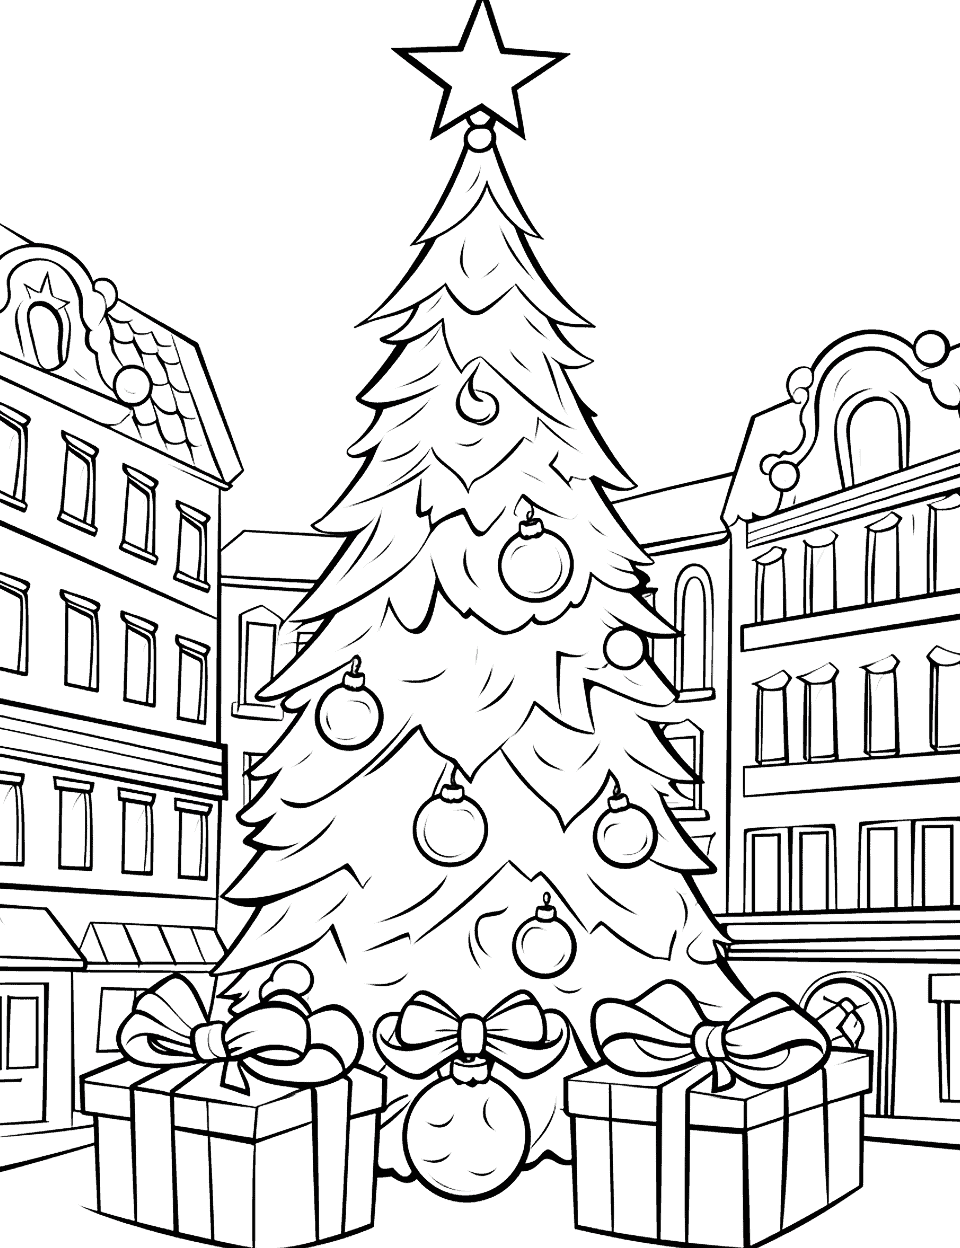 Christmas in the City Coloring Page - A bustling city scene with decorated buildings and a large Christmas tree in the square.